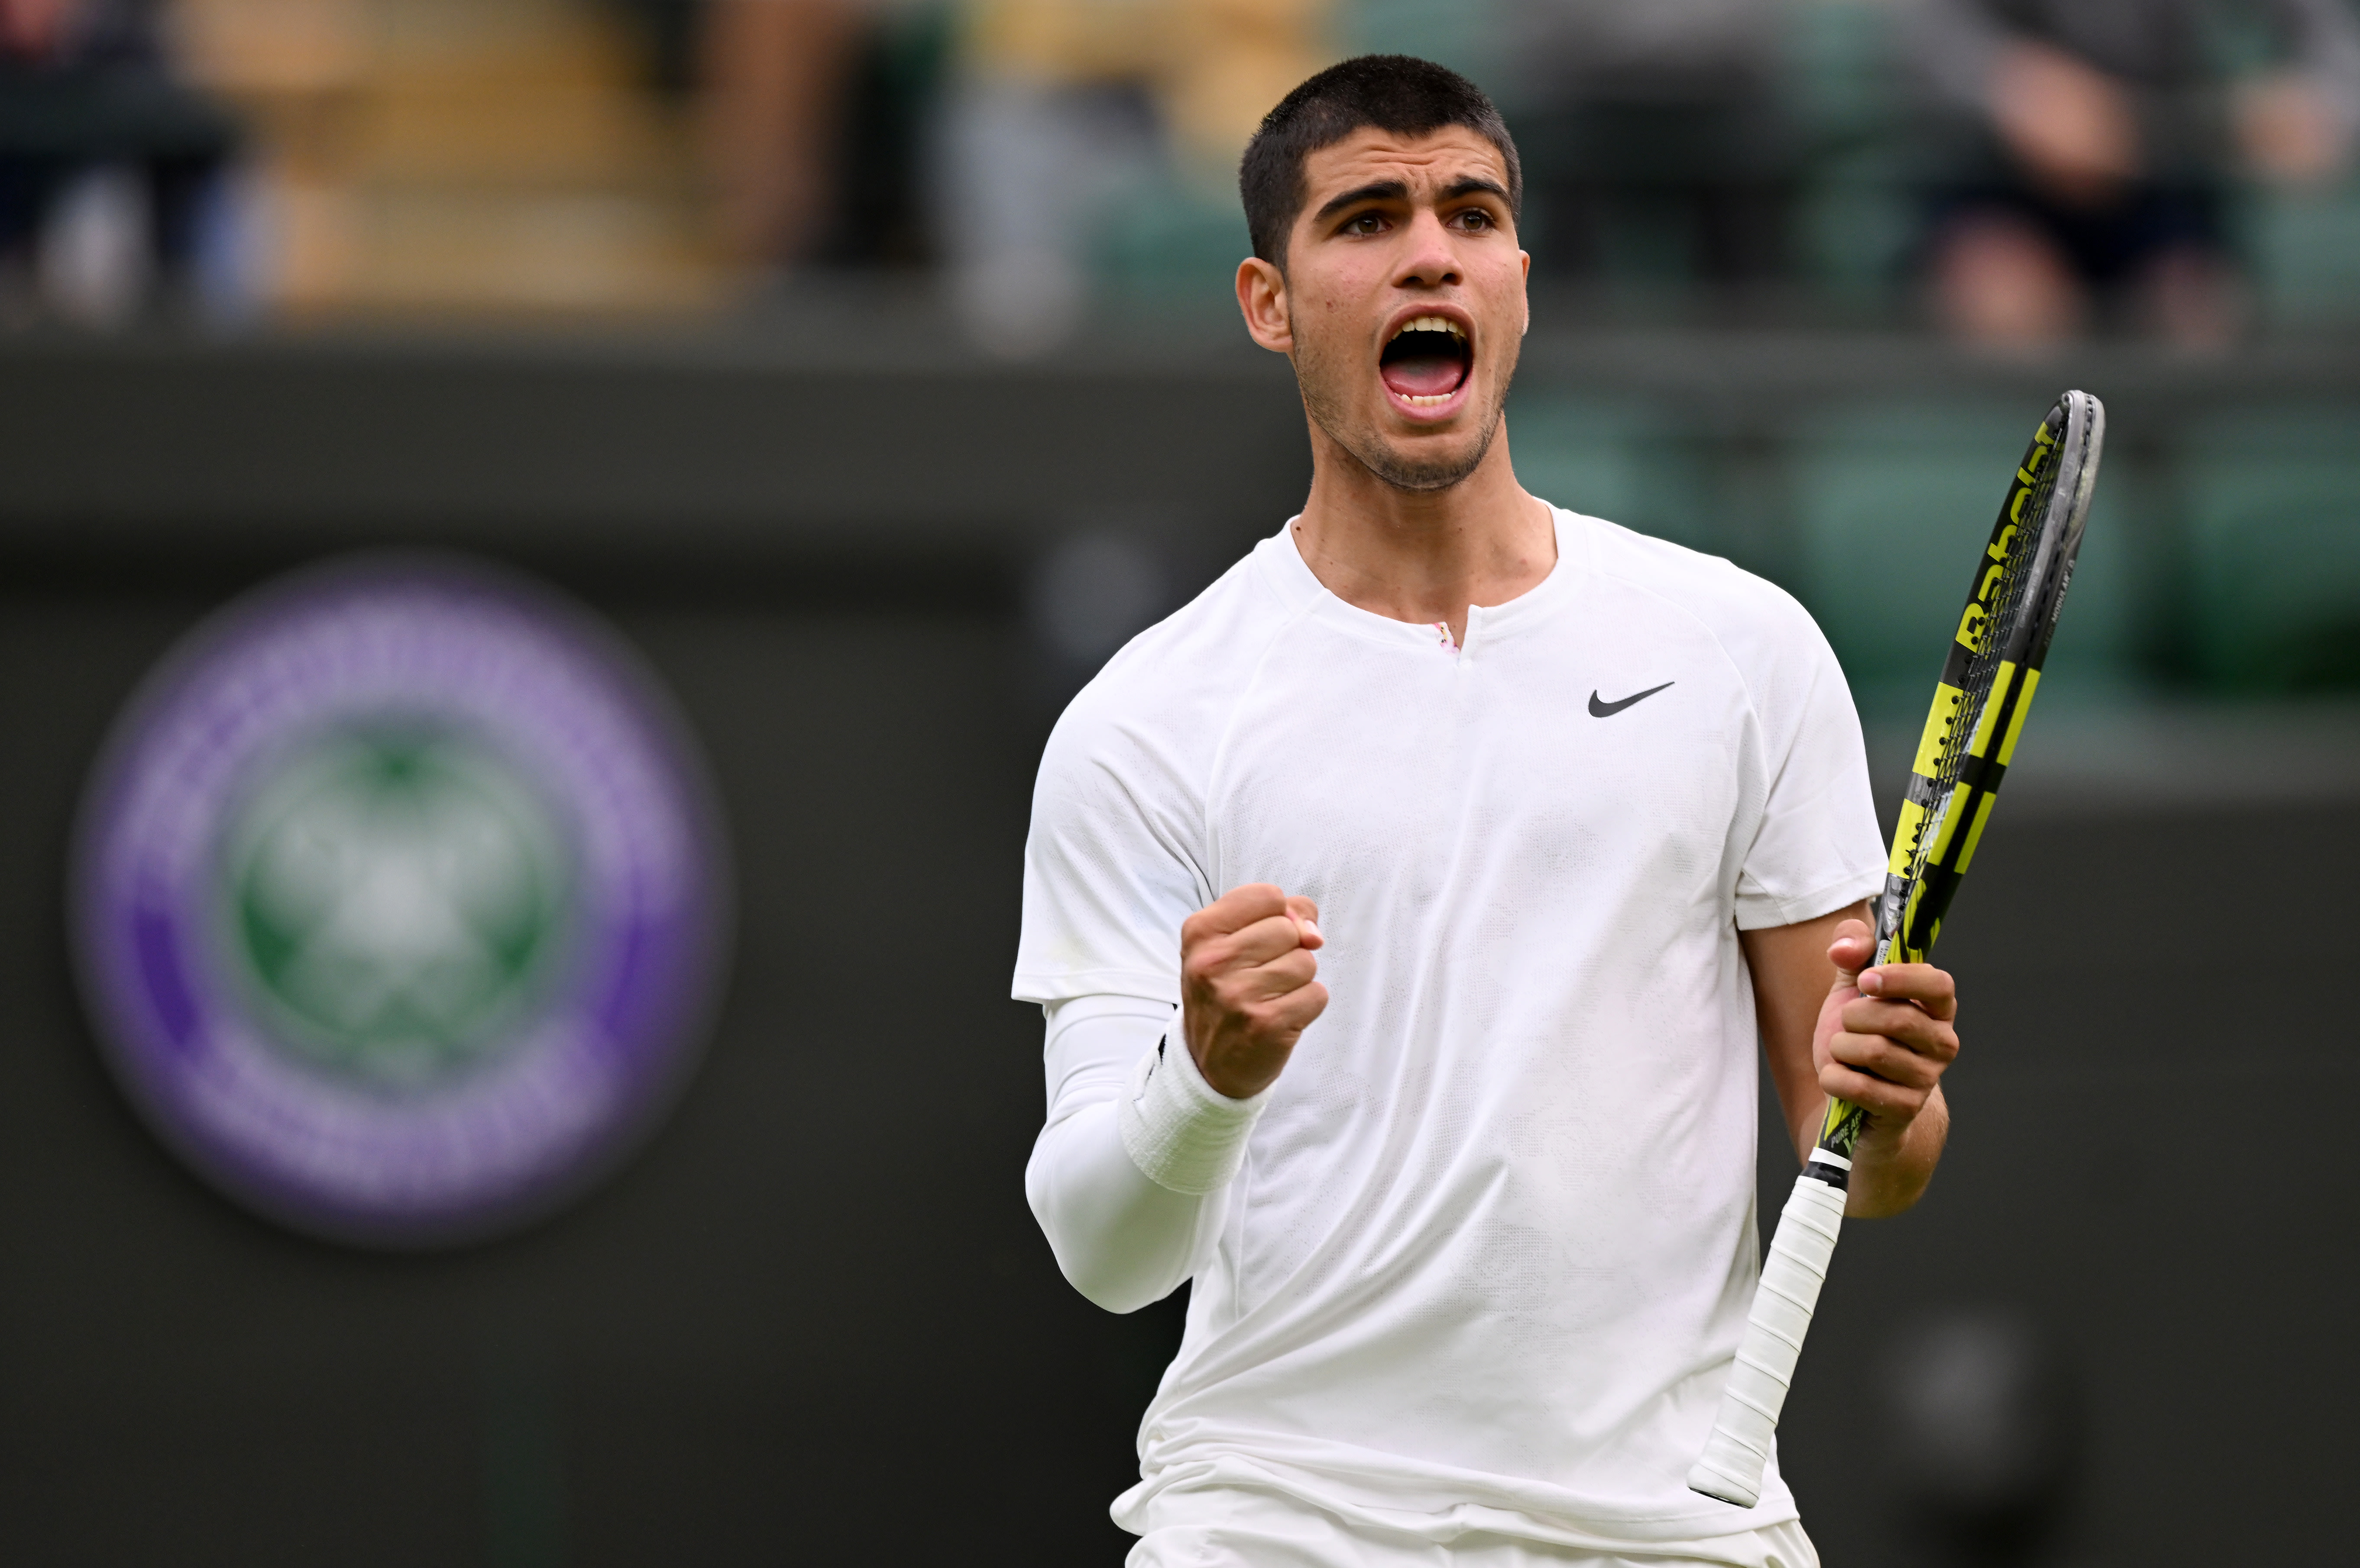 At Wimbledon, Carlos Alcaraz fends off Jan-Lennard Struffs barrage of big serves and relentless net rushes to survive in five